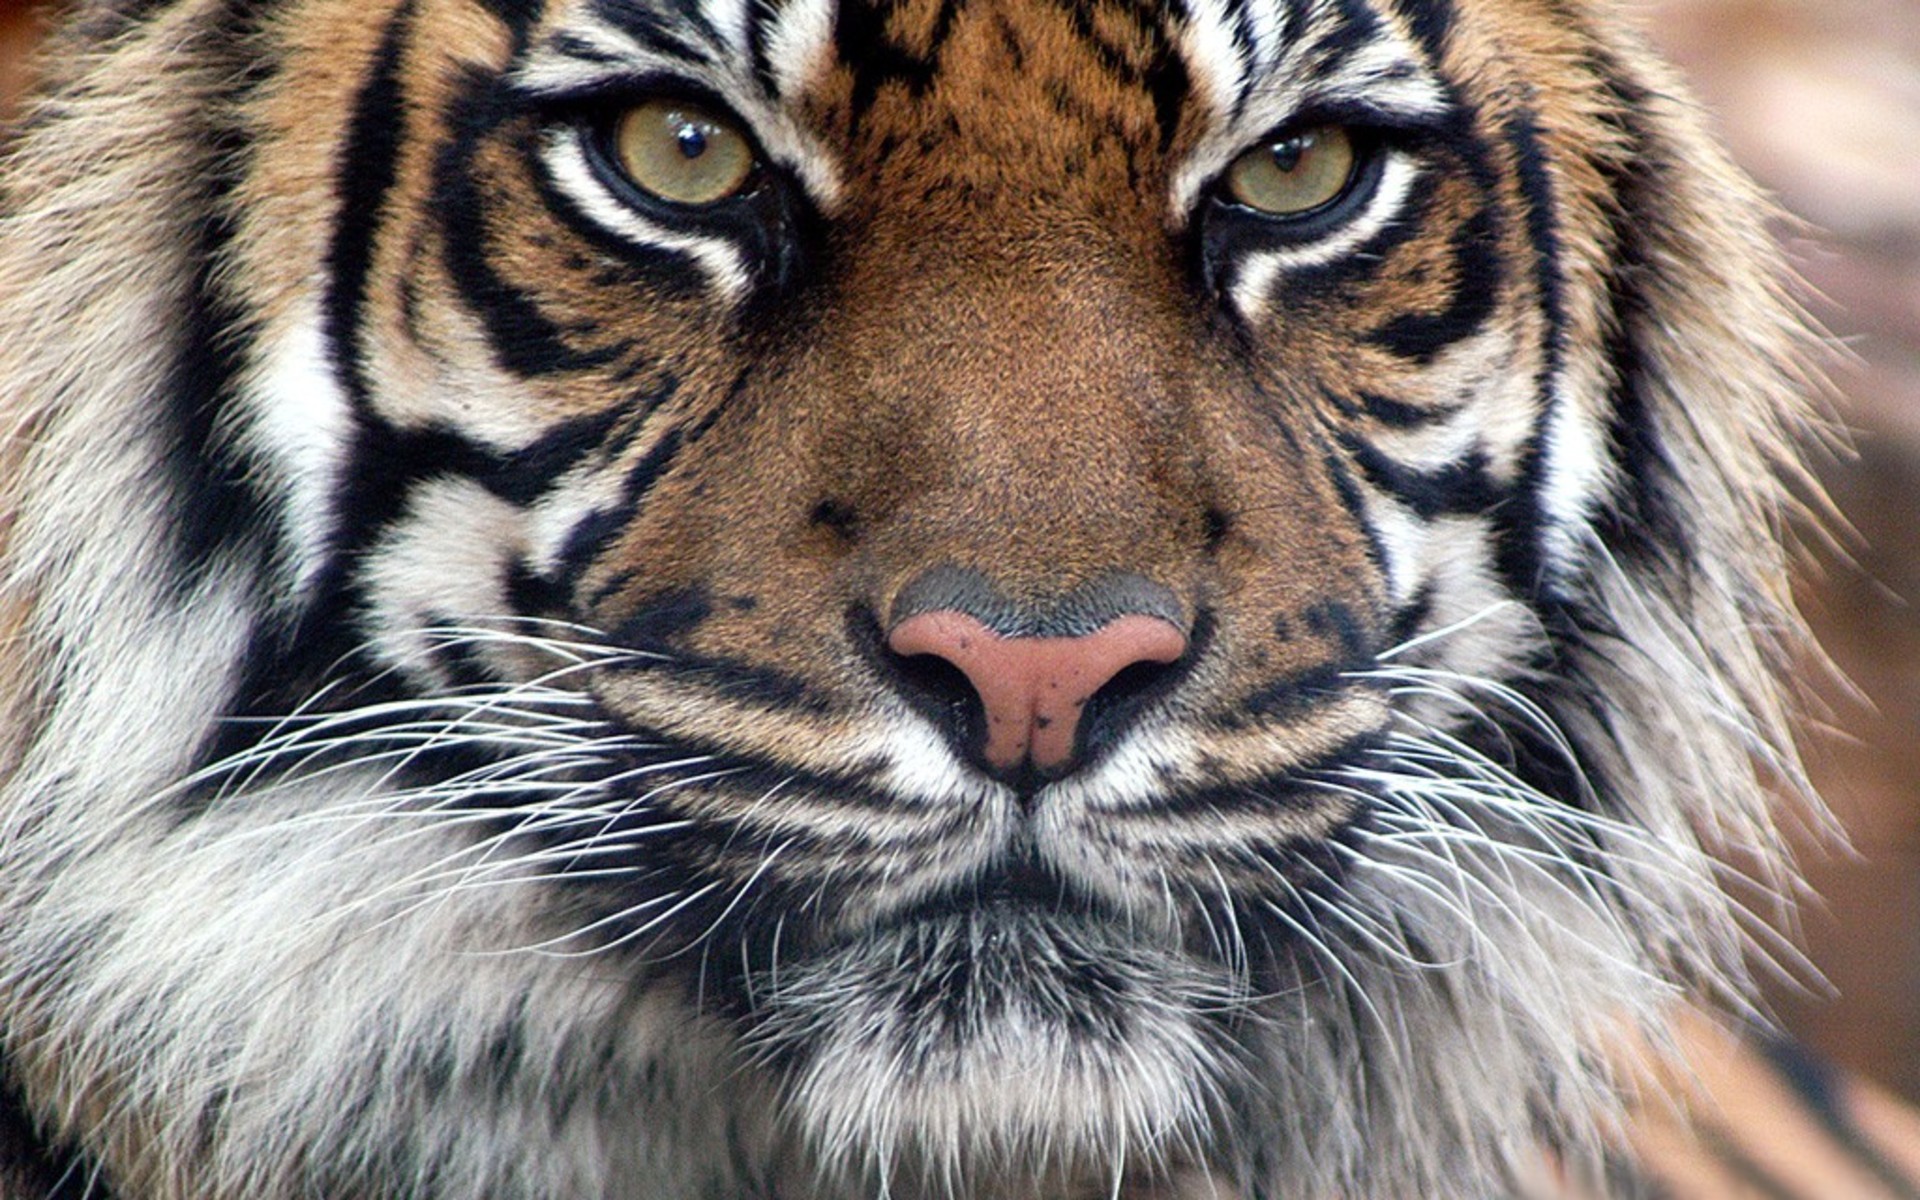 1920x1200 HD Awesome Tiger Face Wallpaper Full Size - HiReWallpapers 3415